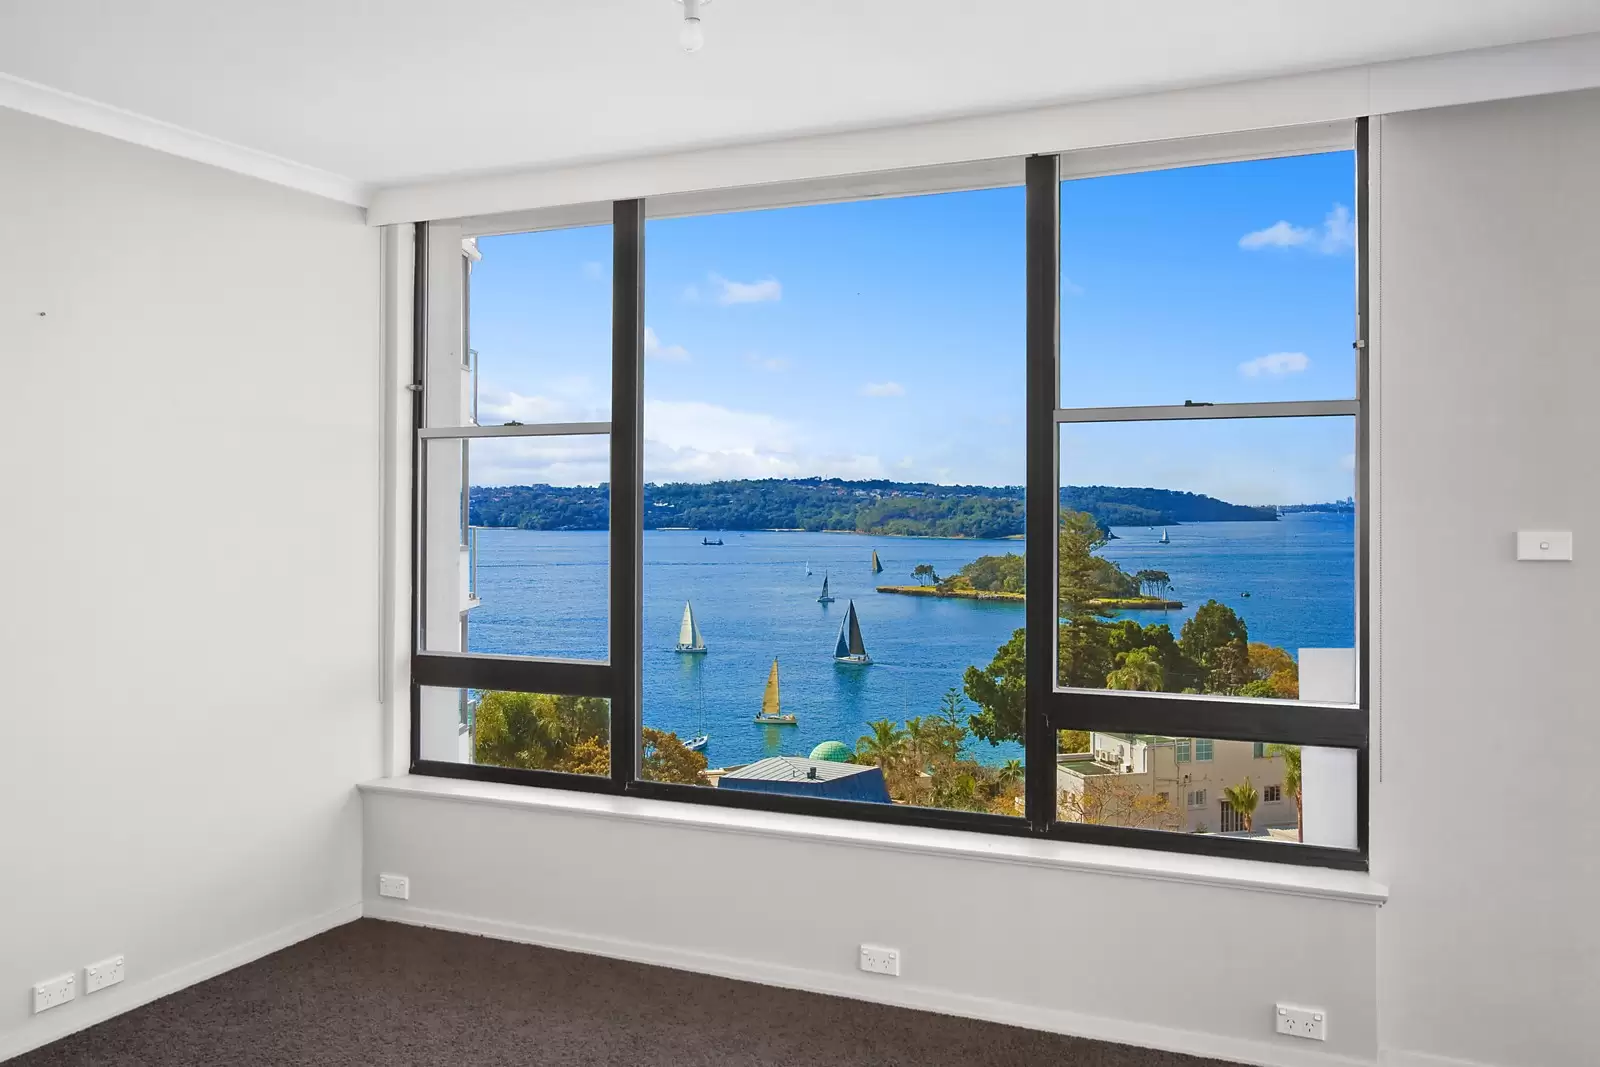 Photo #4: 5C/5-11 Thornton Street, Darling Point - Sold by Sydney Sotheby's International Realty